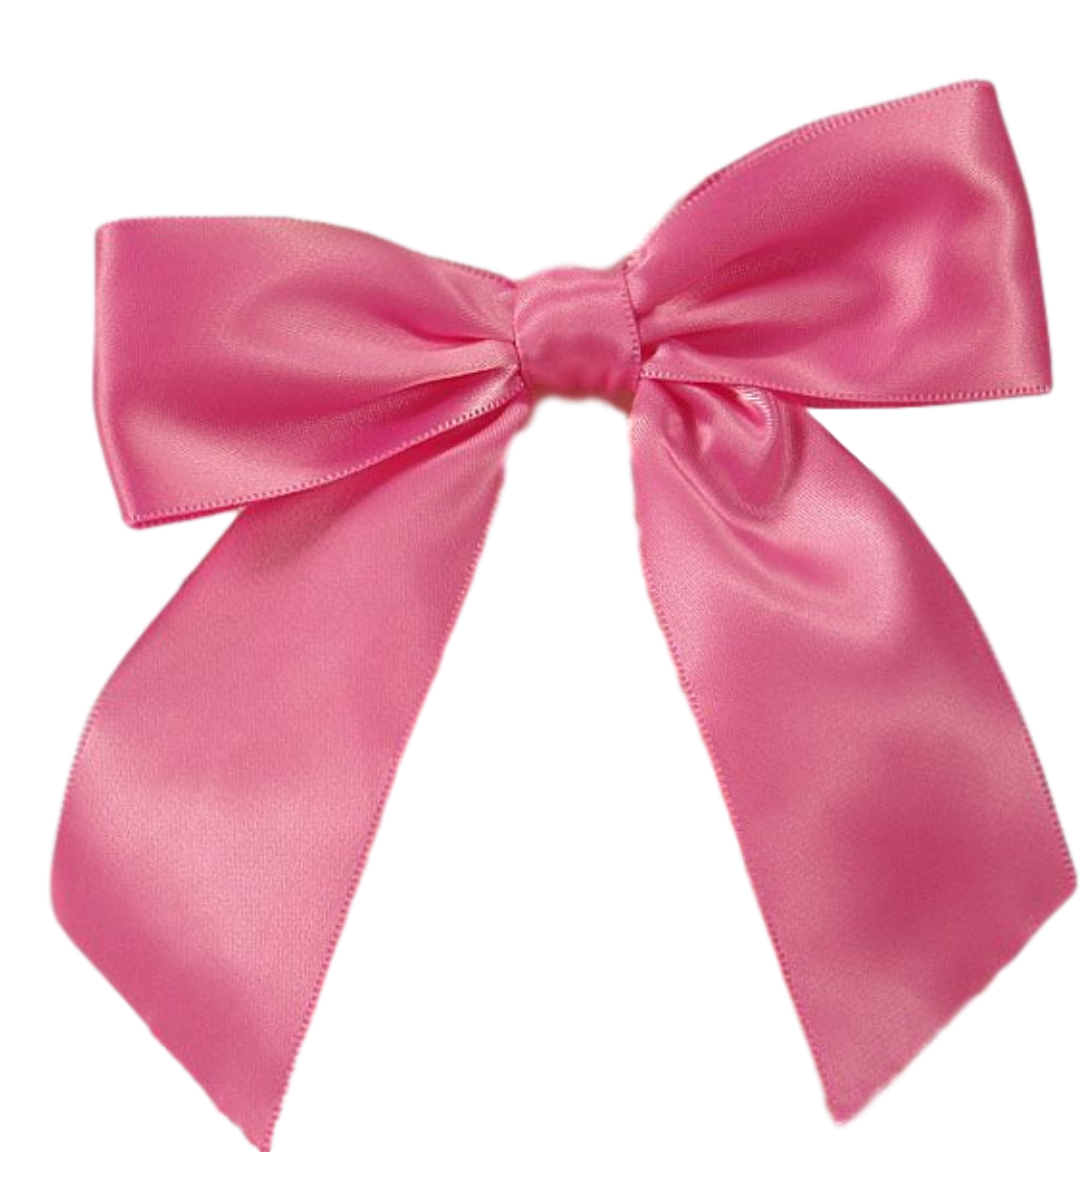 Buy Black Satin Twist Tie Bows - 1.5 Inch, Pack of 50 from JAM Paper